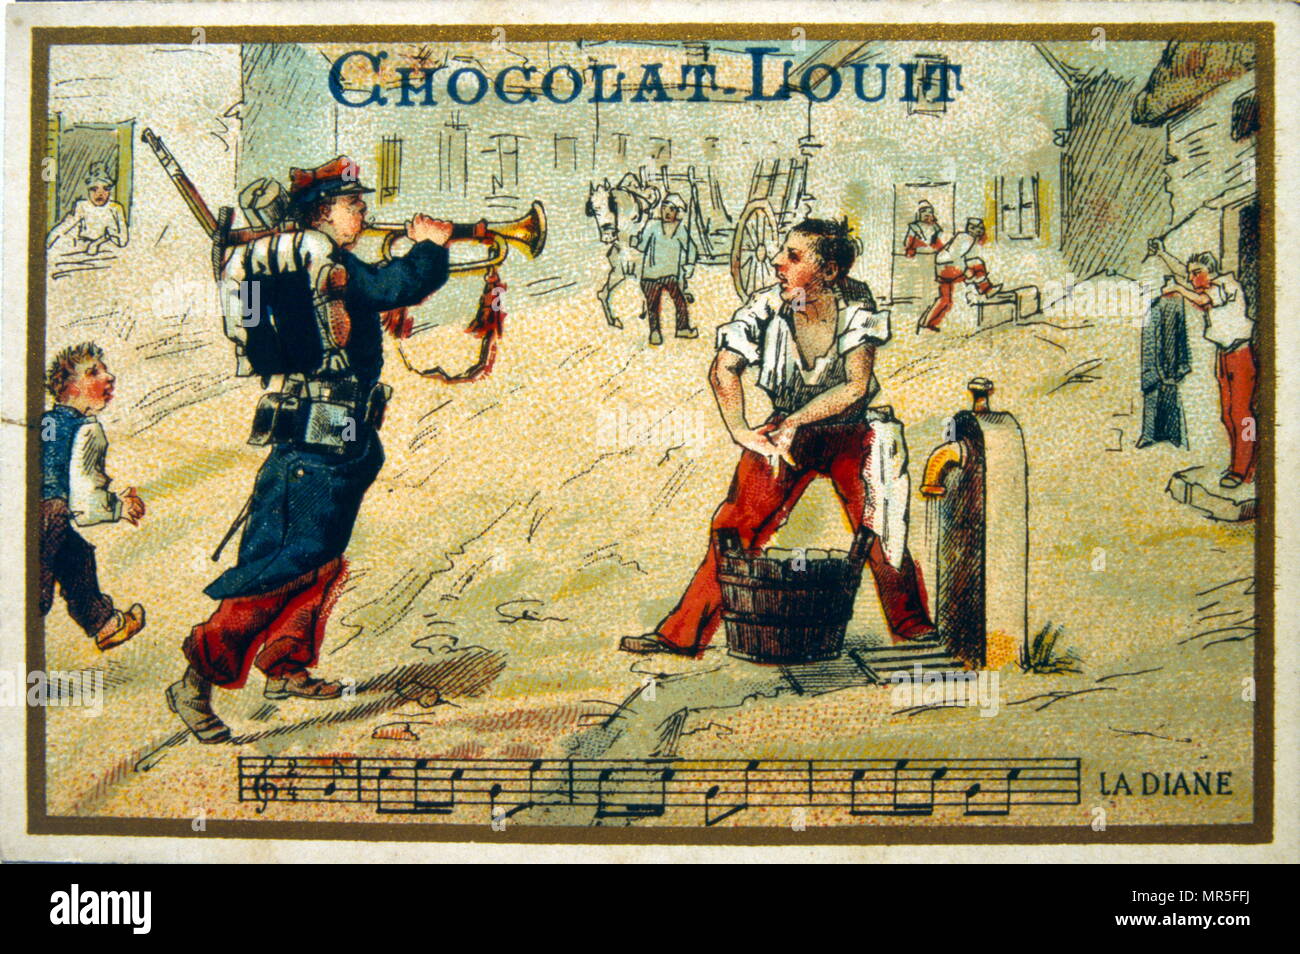 Chromolithograph from a chocolate wrapper, circa 1900, depicting French cavalry bugler next to a man drawing water from a street water pump. Stock Photo